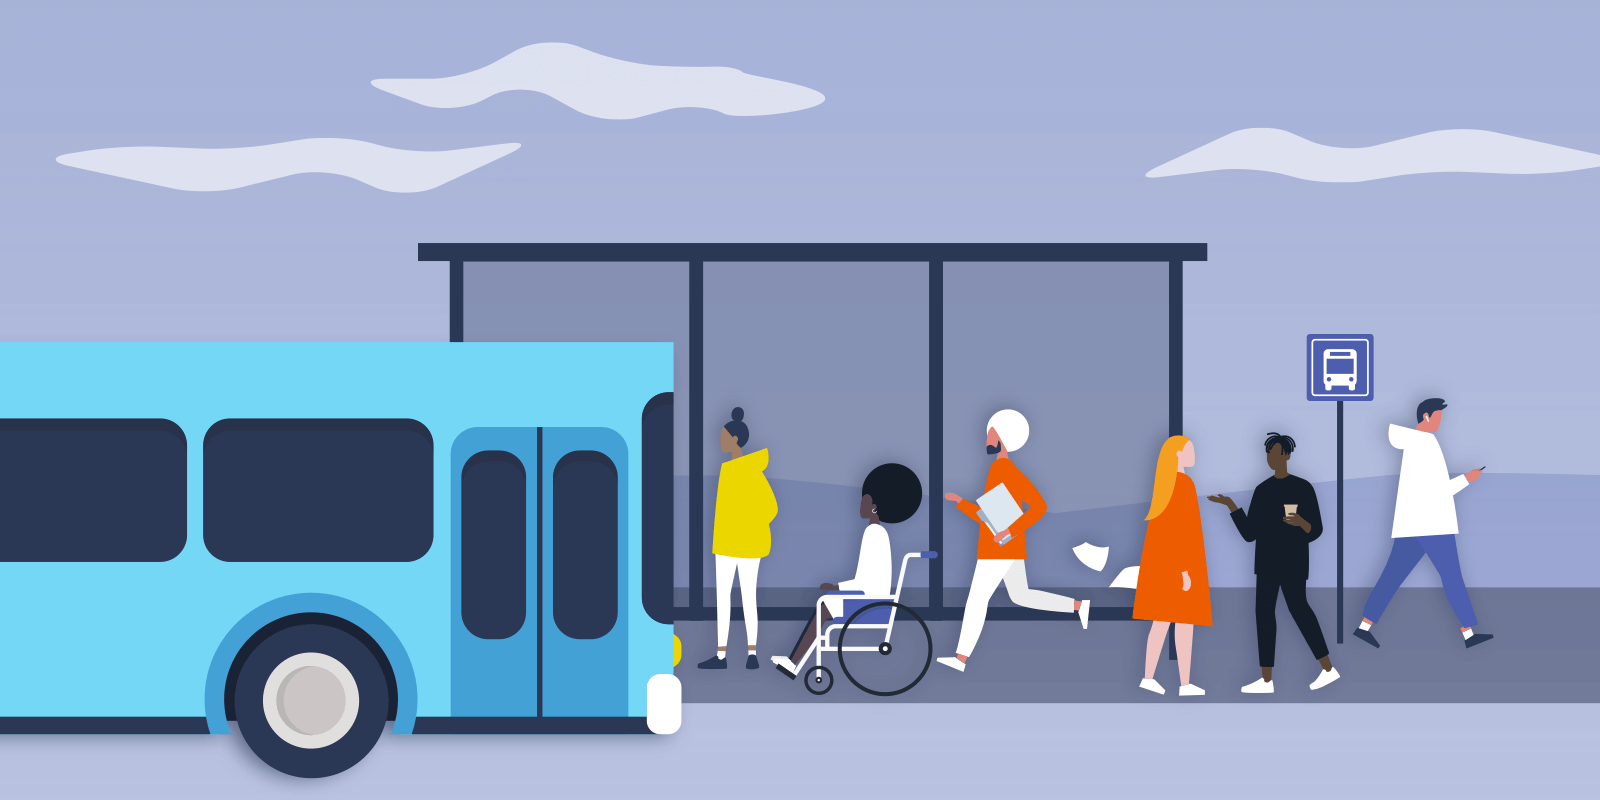 Illustration of a diverse group of people at bus stop